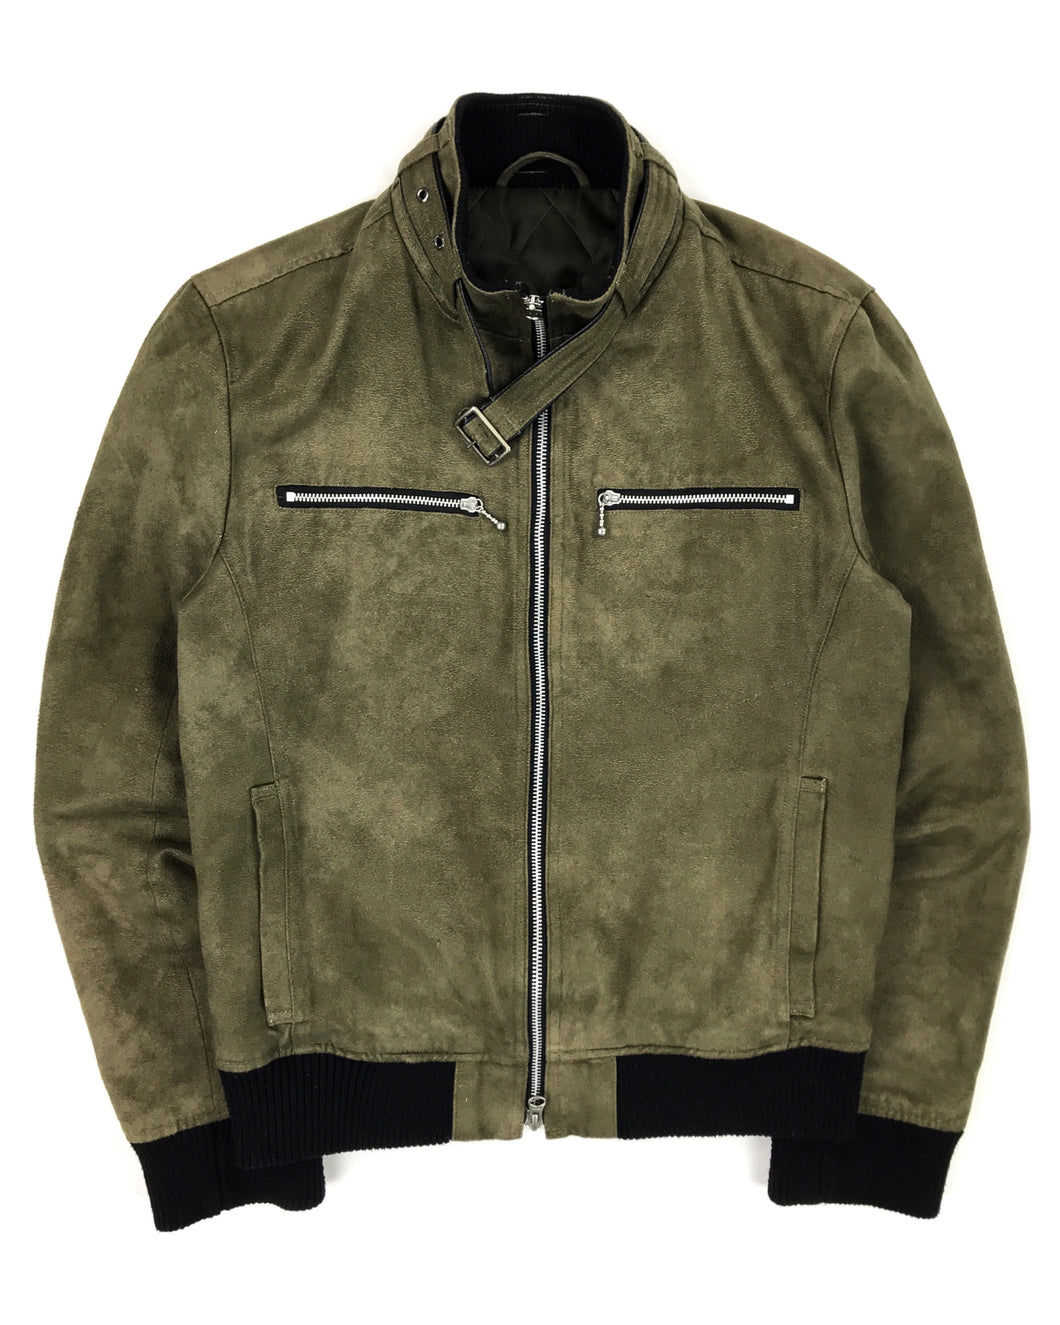 MODERN LOVERS Suede Leather Rider Jacket (Early 2000’s)